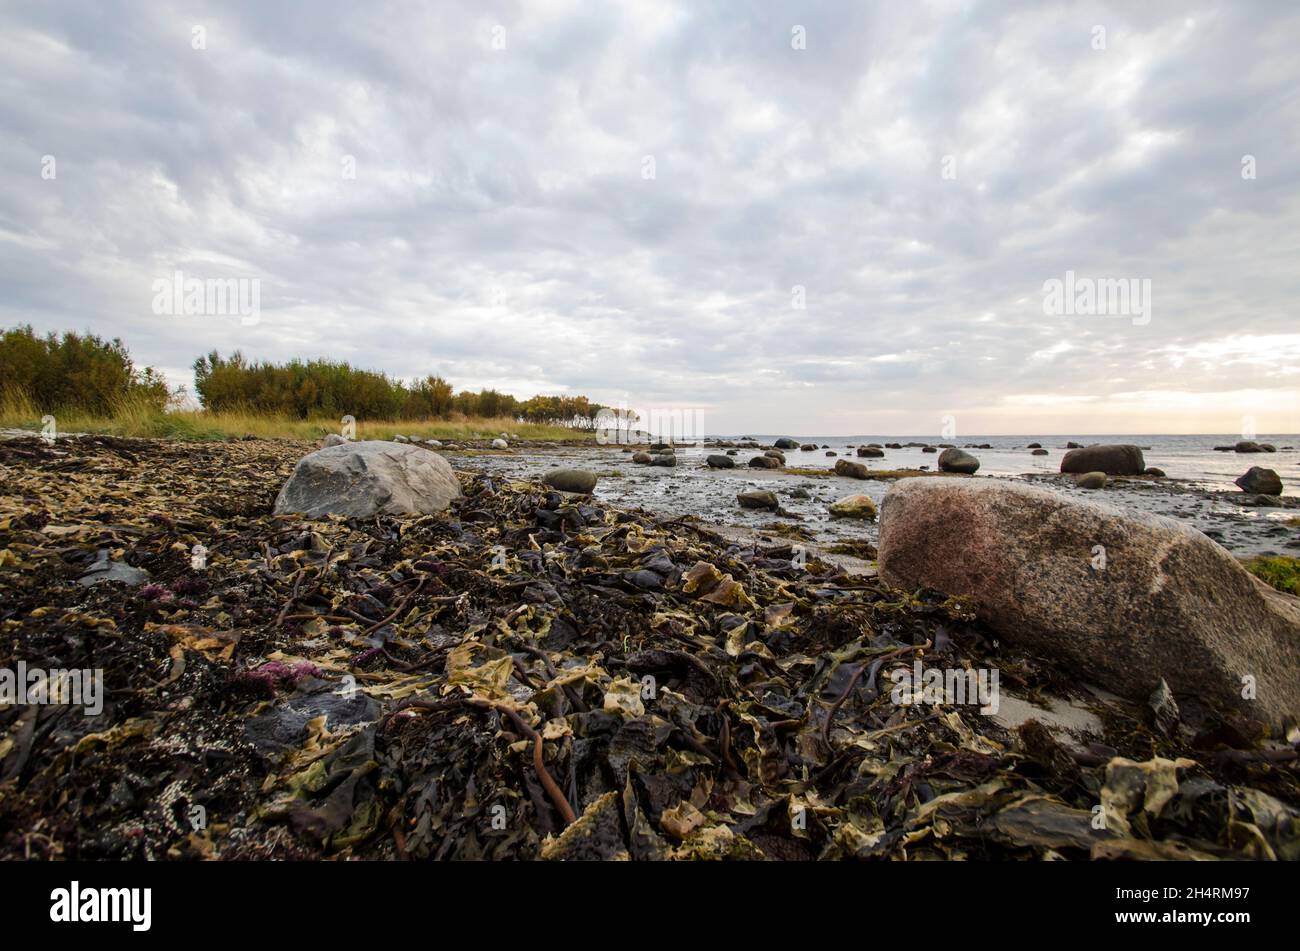 There are many algae on the shore. Kelp. After the storm Stock Photo